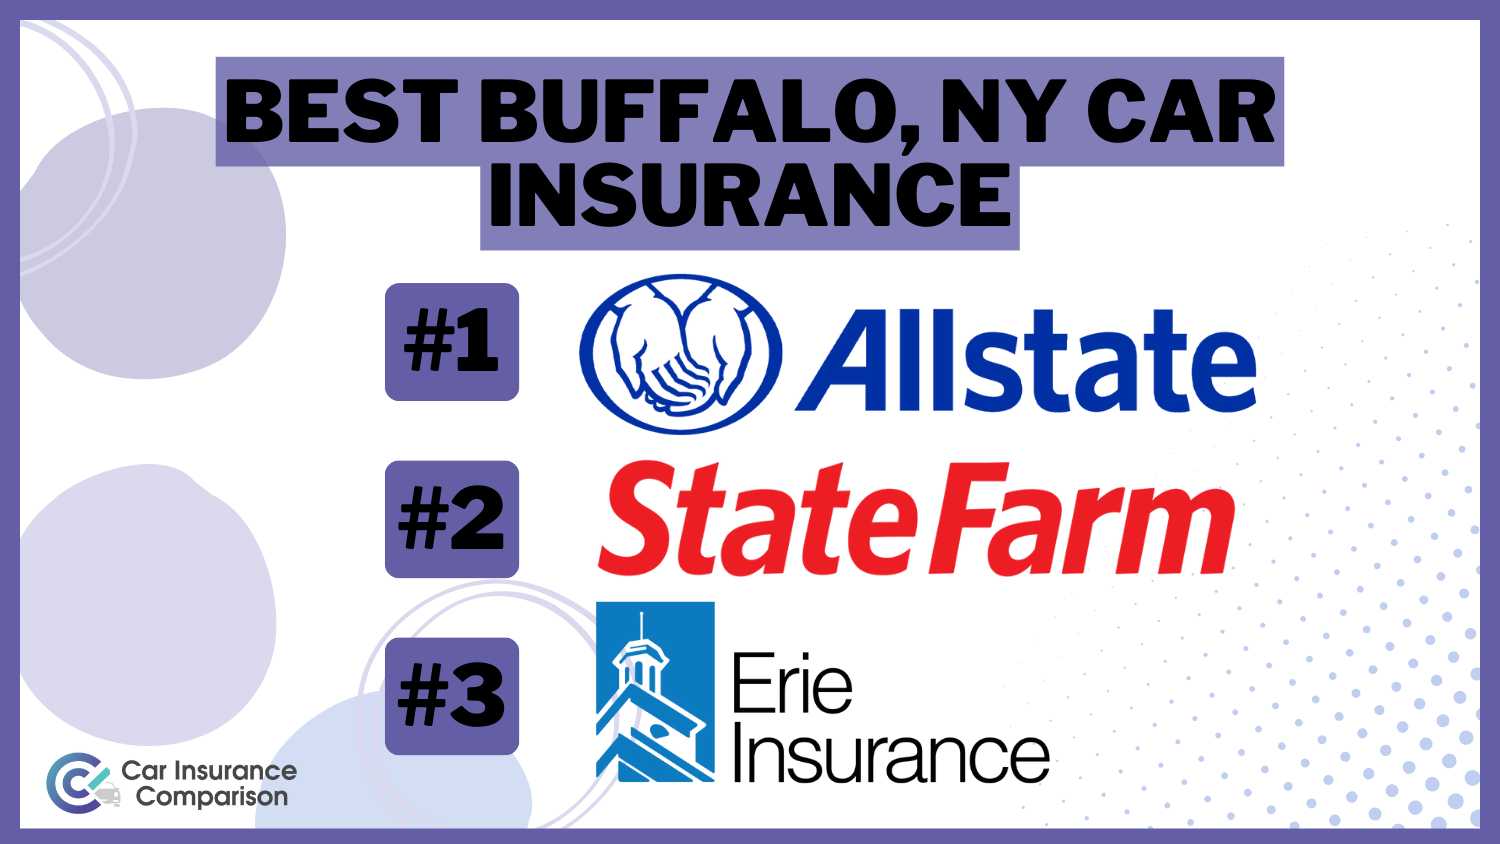 Best Buffalo, NY Car Insurance: Allstate, State Farm, and Erie